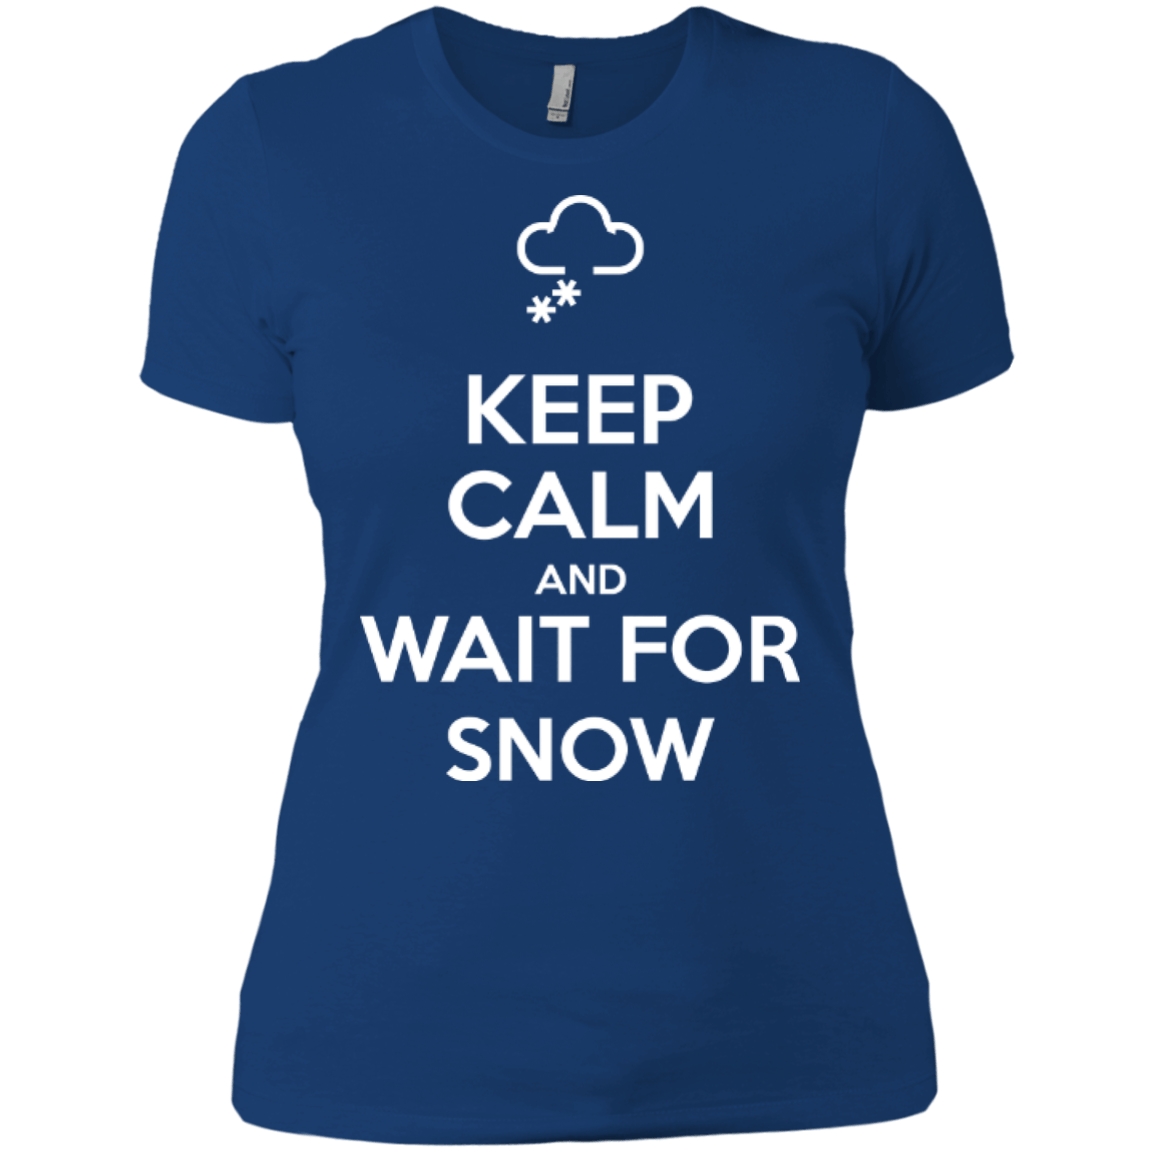 Keep Calm And Wait For Snow Ladies Tees - Powderaddicts